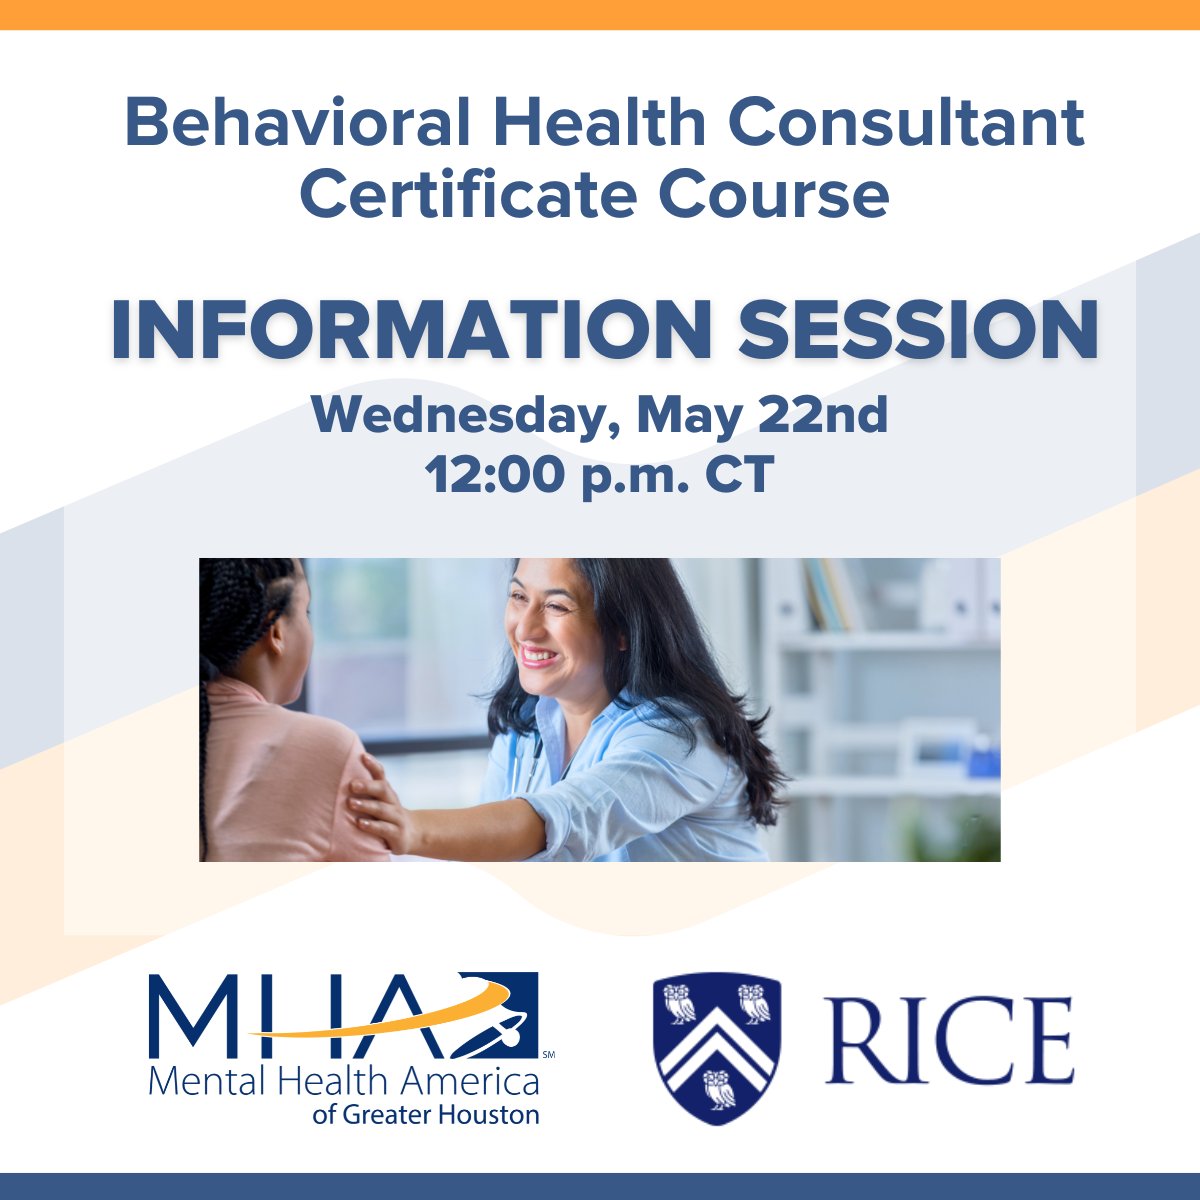 Join us on Wednesday, 5/22 to learn more about the Behavioral Health Consultant Certificate Course program coursework, cost, and logistics. Register today --> bit.ly/4dwa5i7 #behavioralhealth #integratedhealthcare #mentalhealth